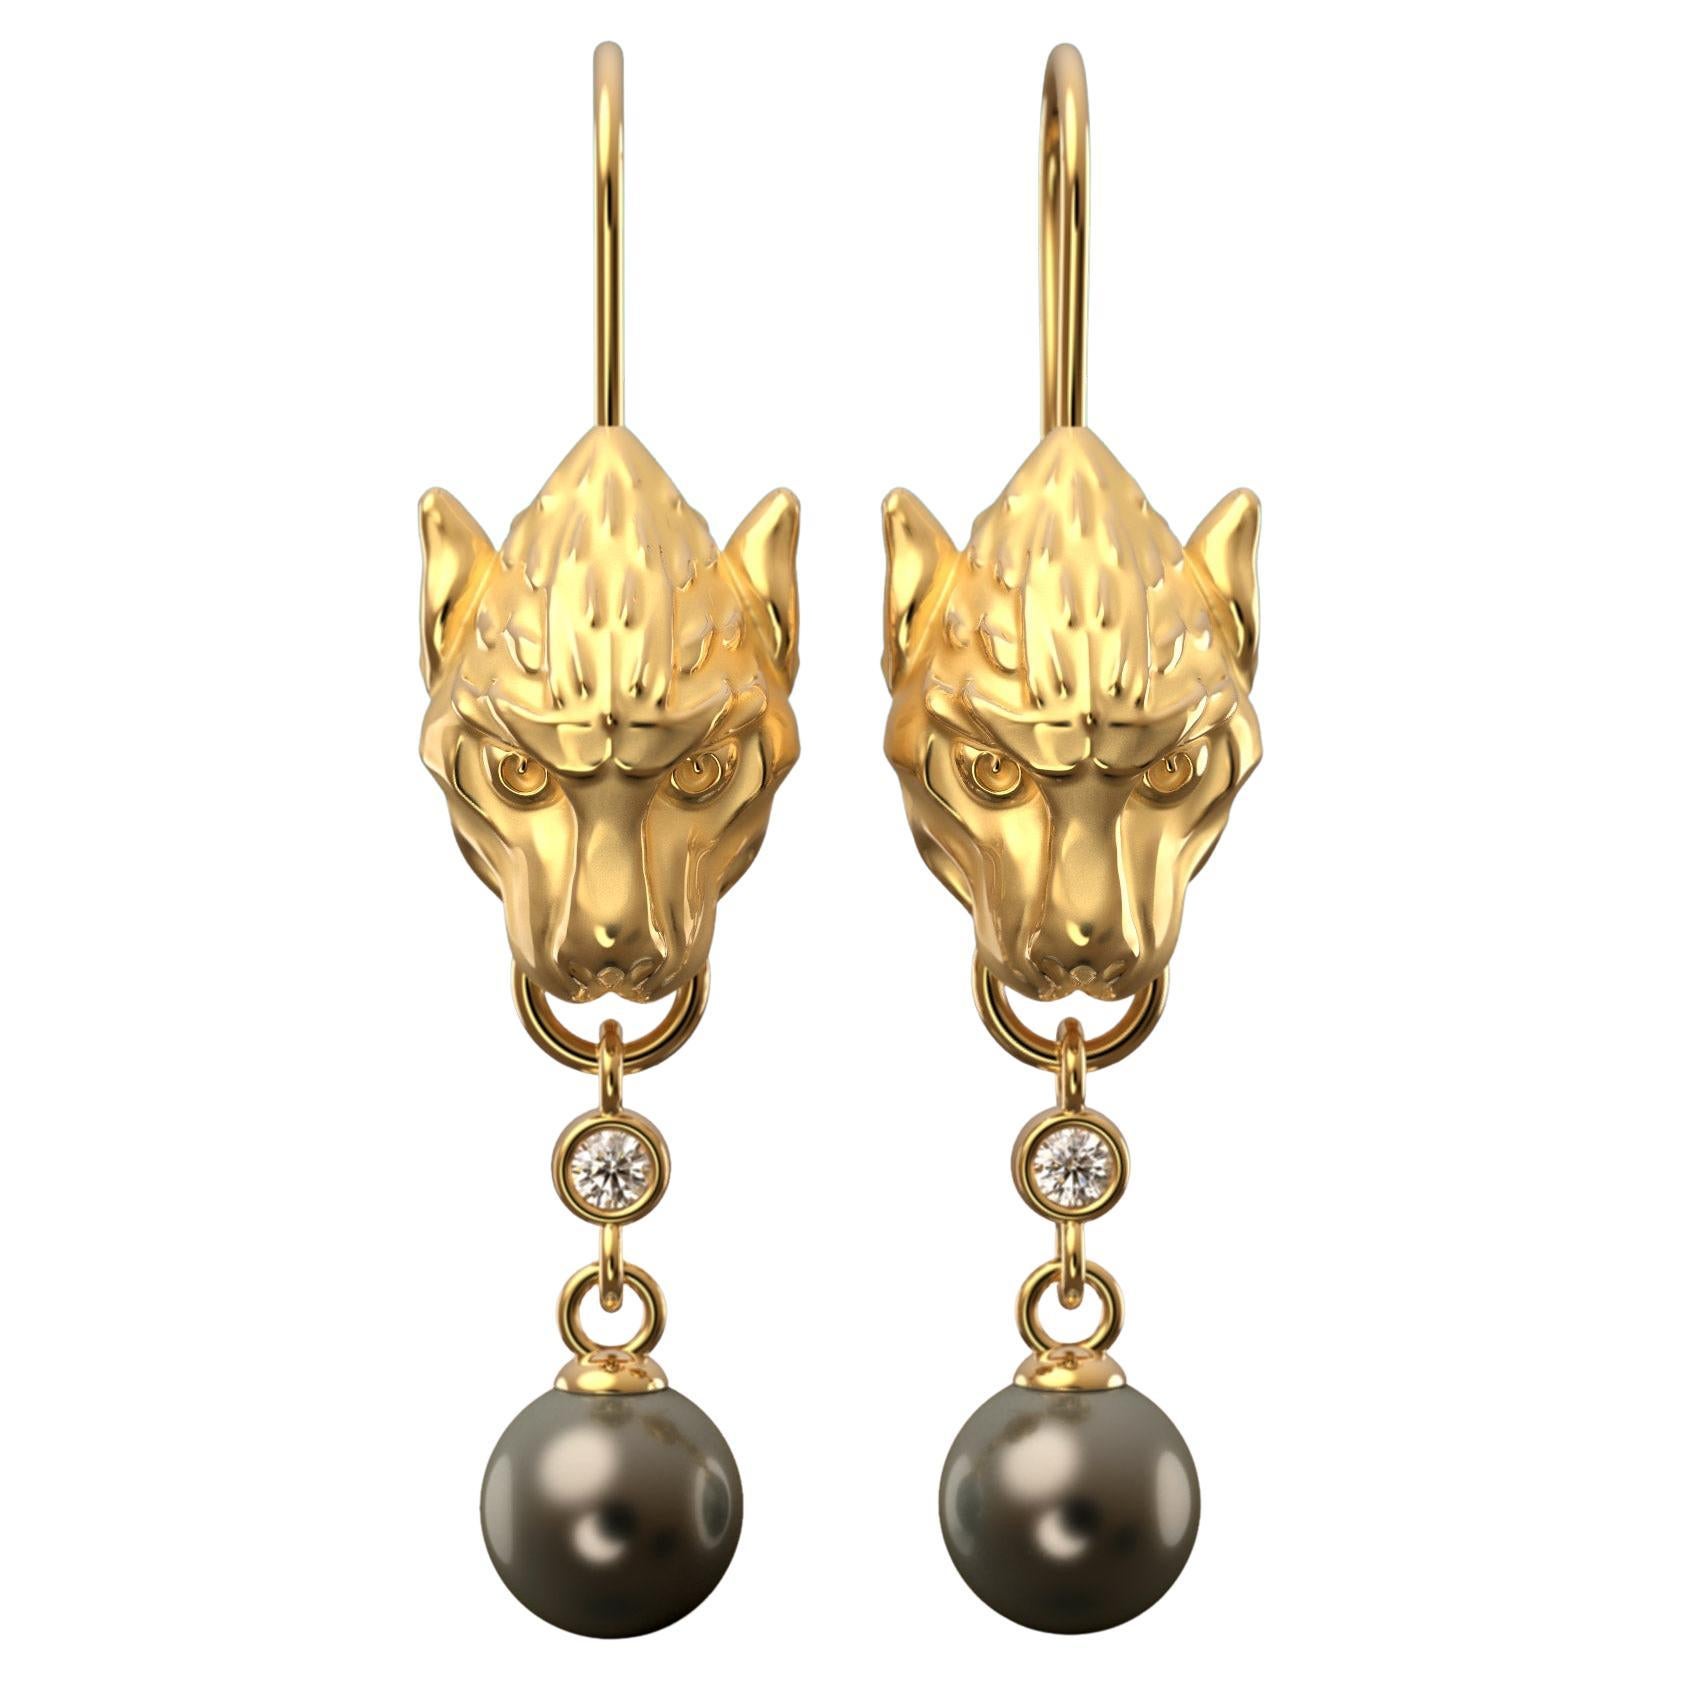  Pearls and Diamonds 14k Gold Earrings, Gothic Gargoyle Earrings Made in Italy For Sale 2